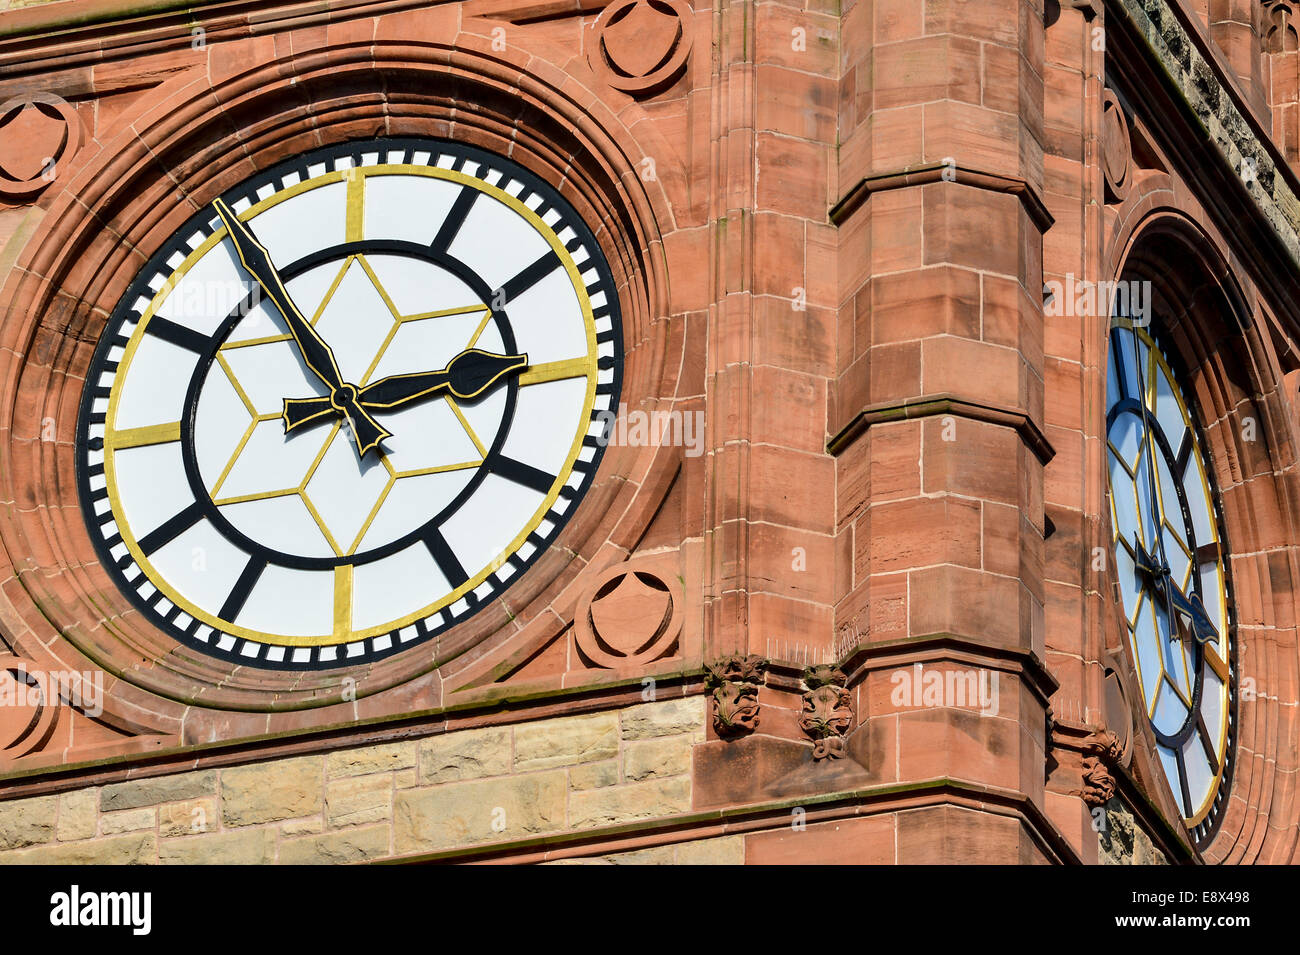 Stock Photo - Clock face on The Guildhall, Derry, Londonderry, Northern Ireland.The Guildhall clock is a replica of  Big Ben. Stock Photo